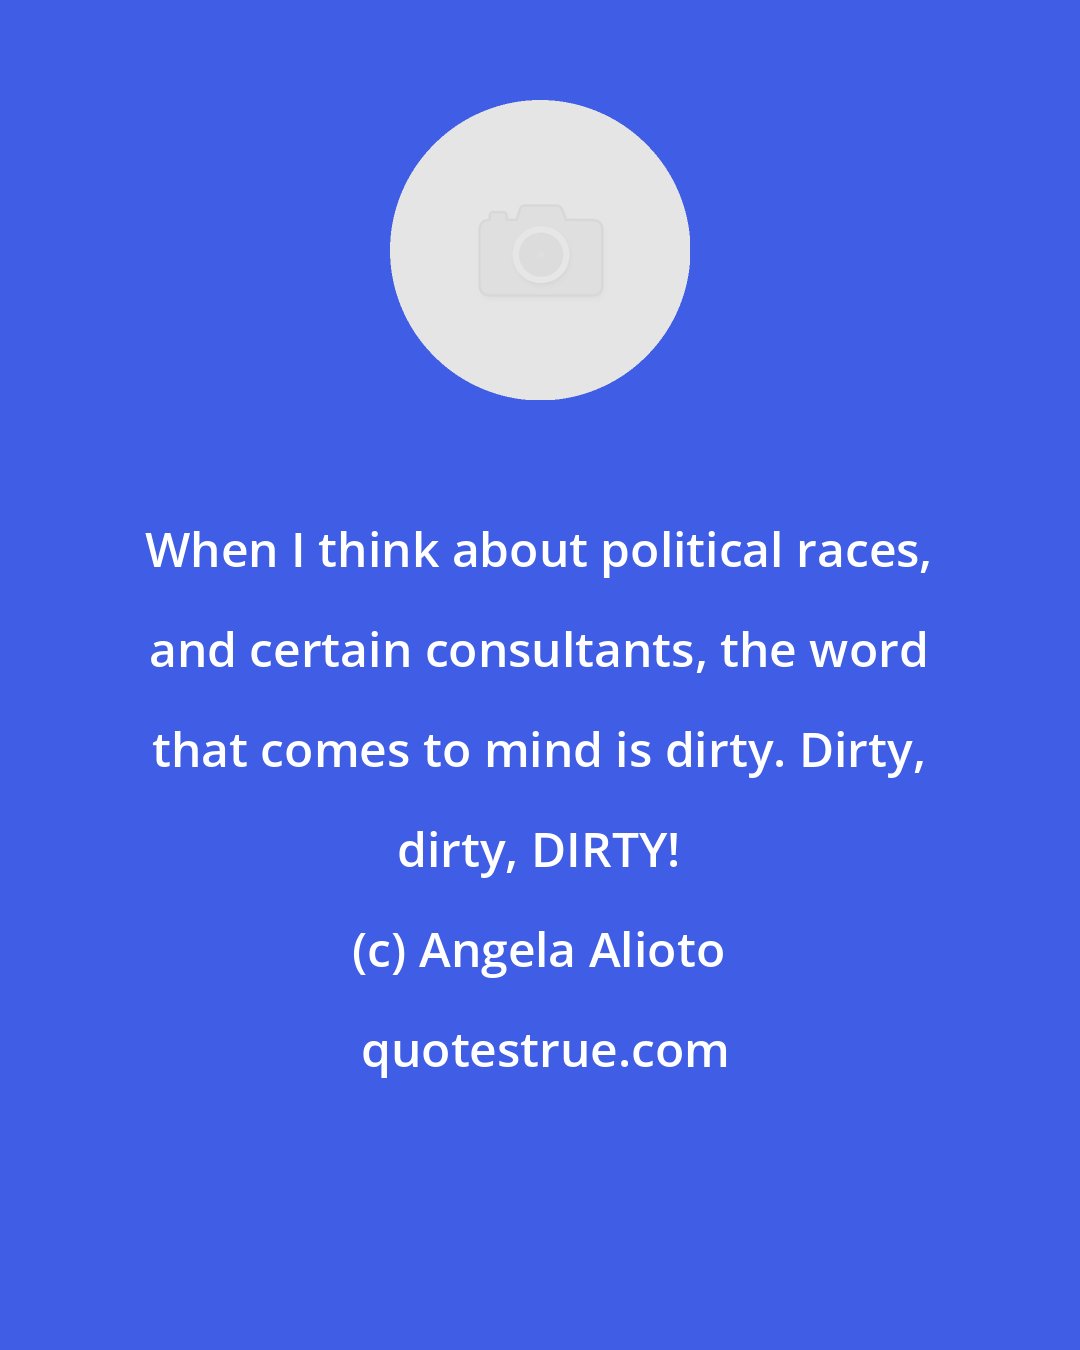 Angela Alioto: When I think about political races, and certain consultants, the word that comes to mind is dirty. Dirty, dirty, DIRTY!